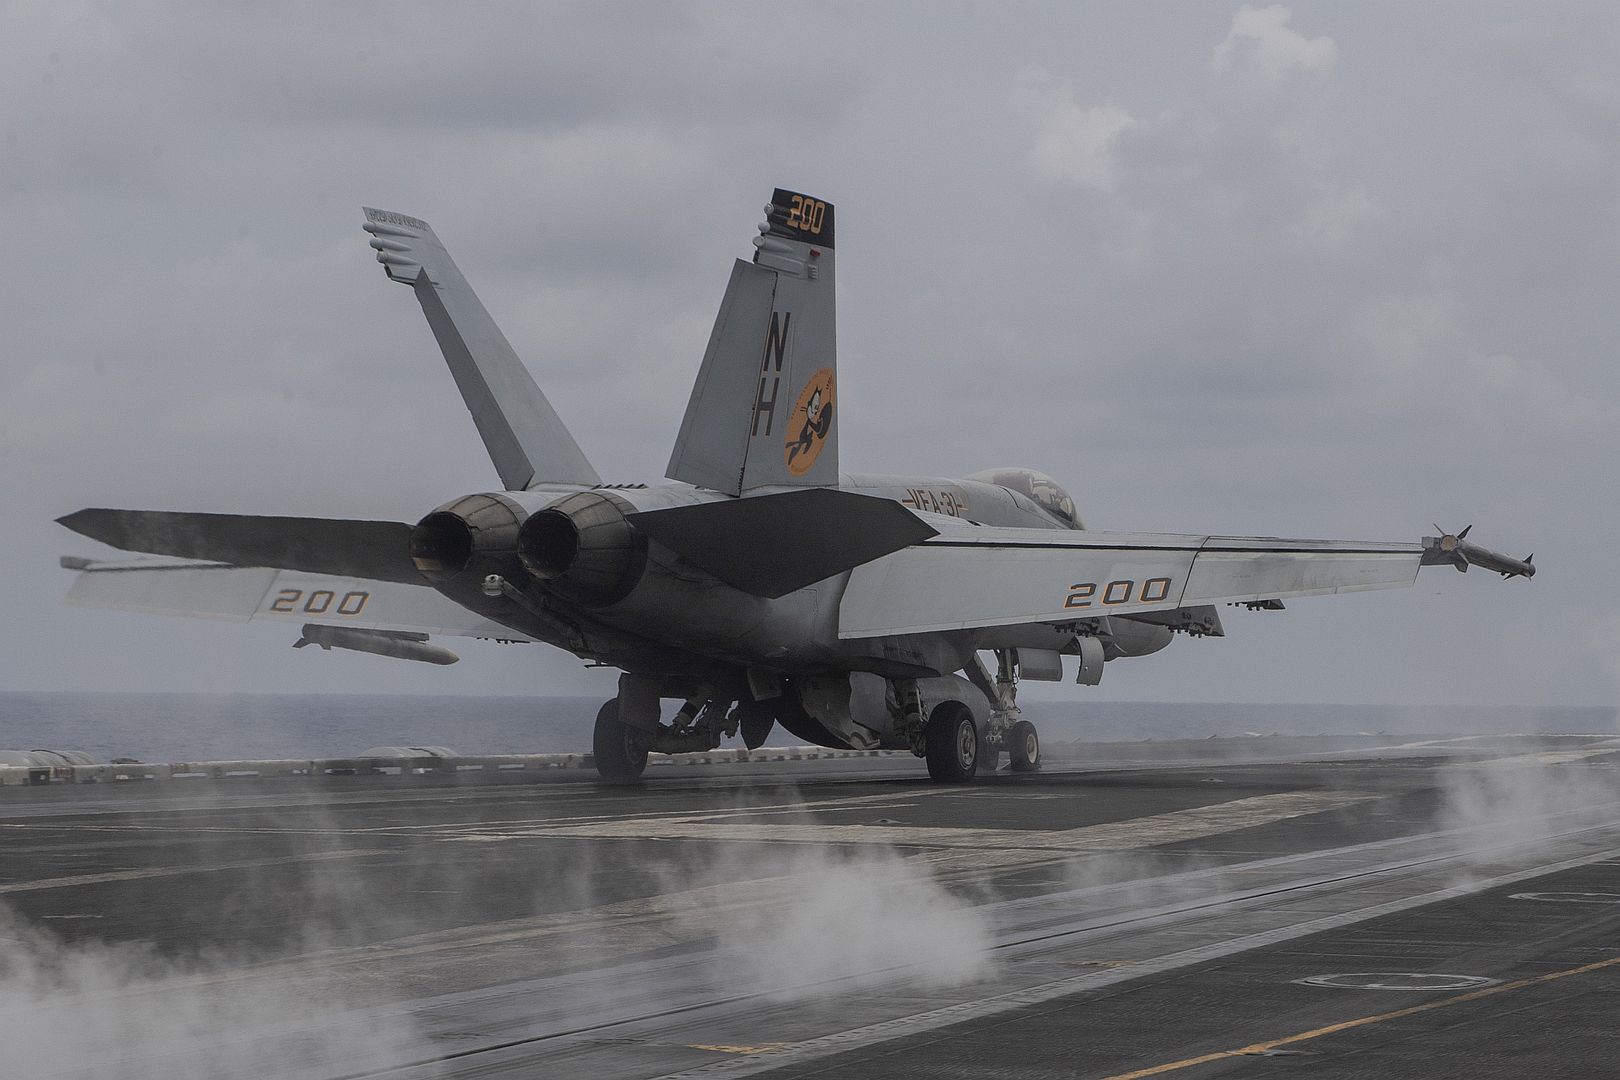  Takes Off From The Flight Deck Of The Aircraft Carrier USS Theodore Roosevel